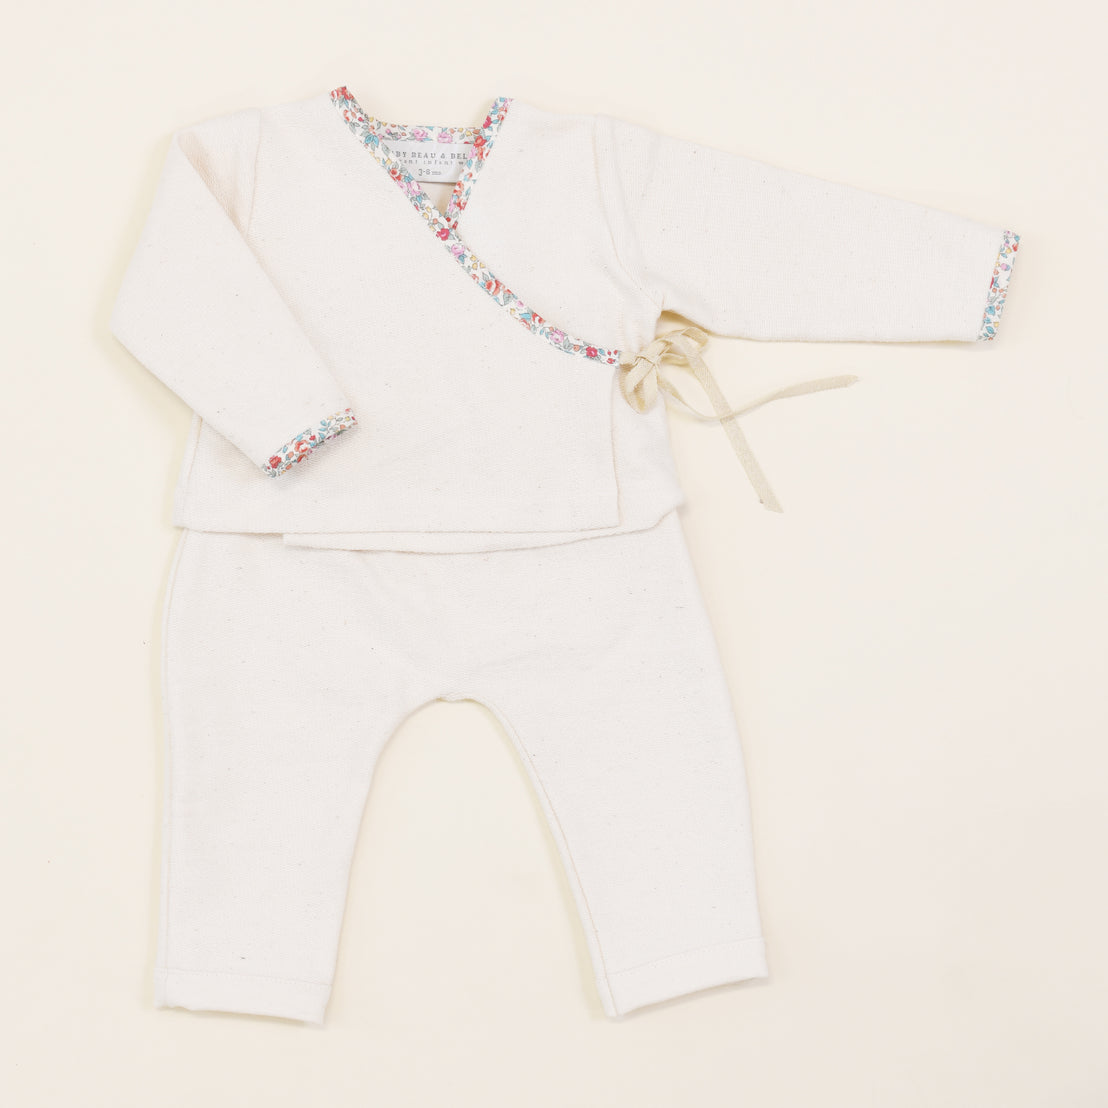 A baby's Petite Fleur Wrap Top & Pants, featuring a kimono-style top and matching pants with floral trim, neatly displayed on a light beige background.